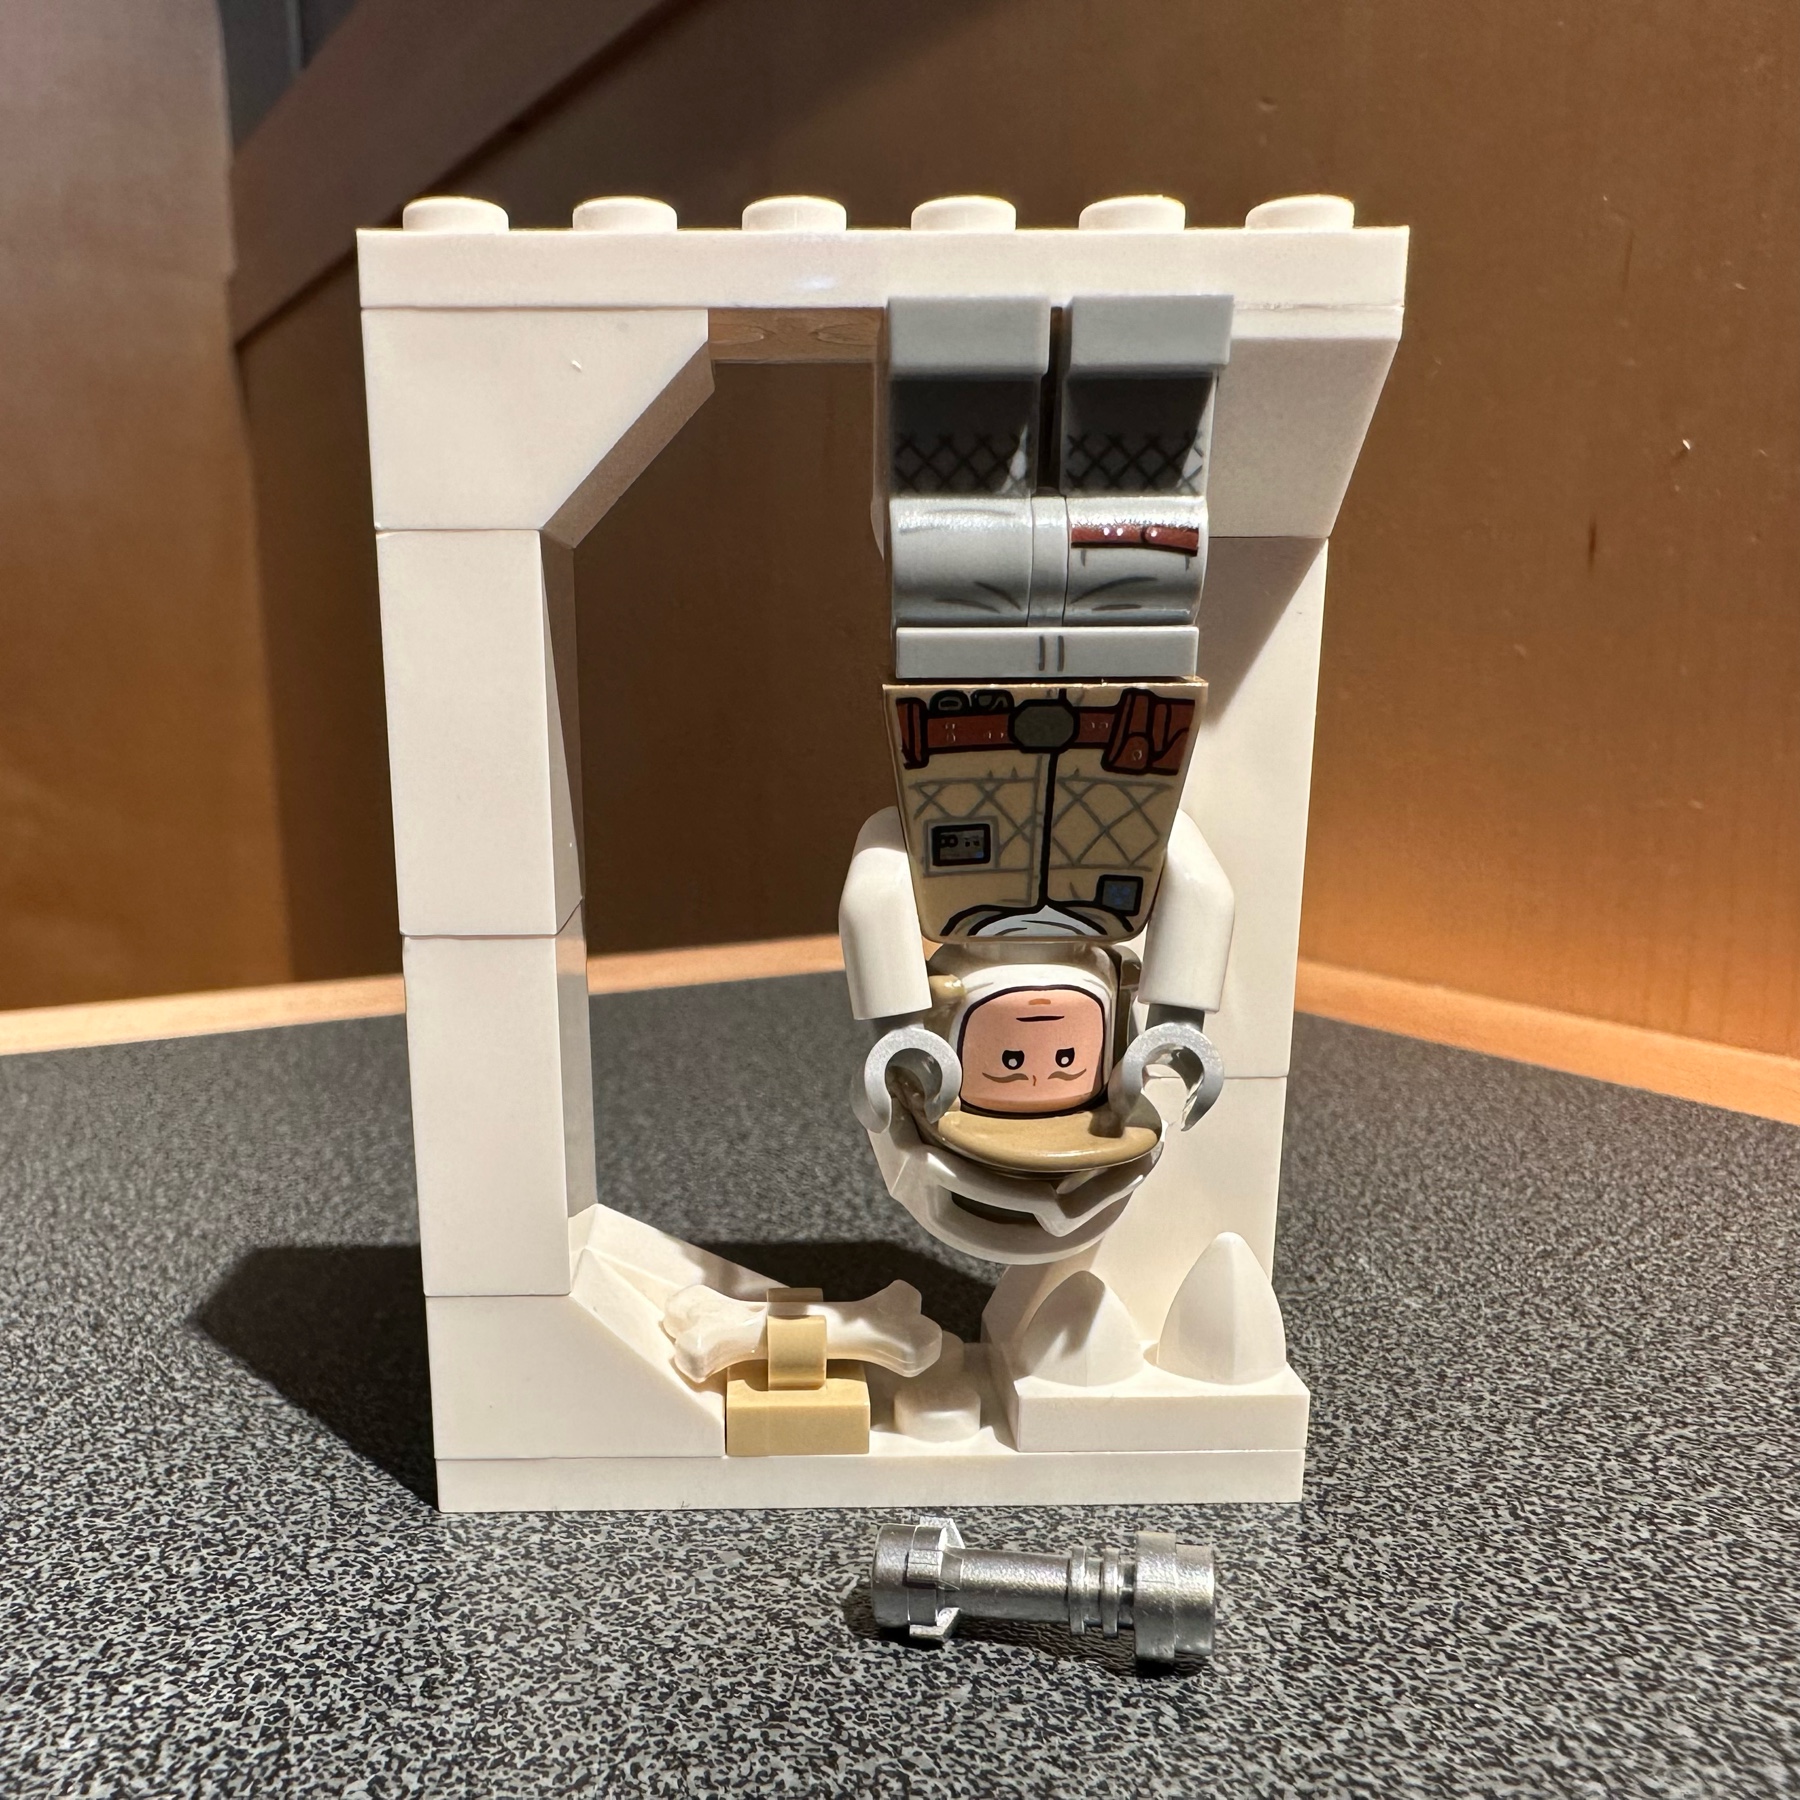 LEGO Luke Skywalker hangs upside down in the Wampa's ice cave with his light saber just out of reach